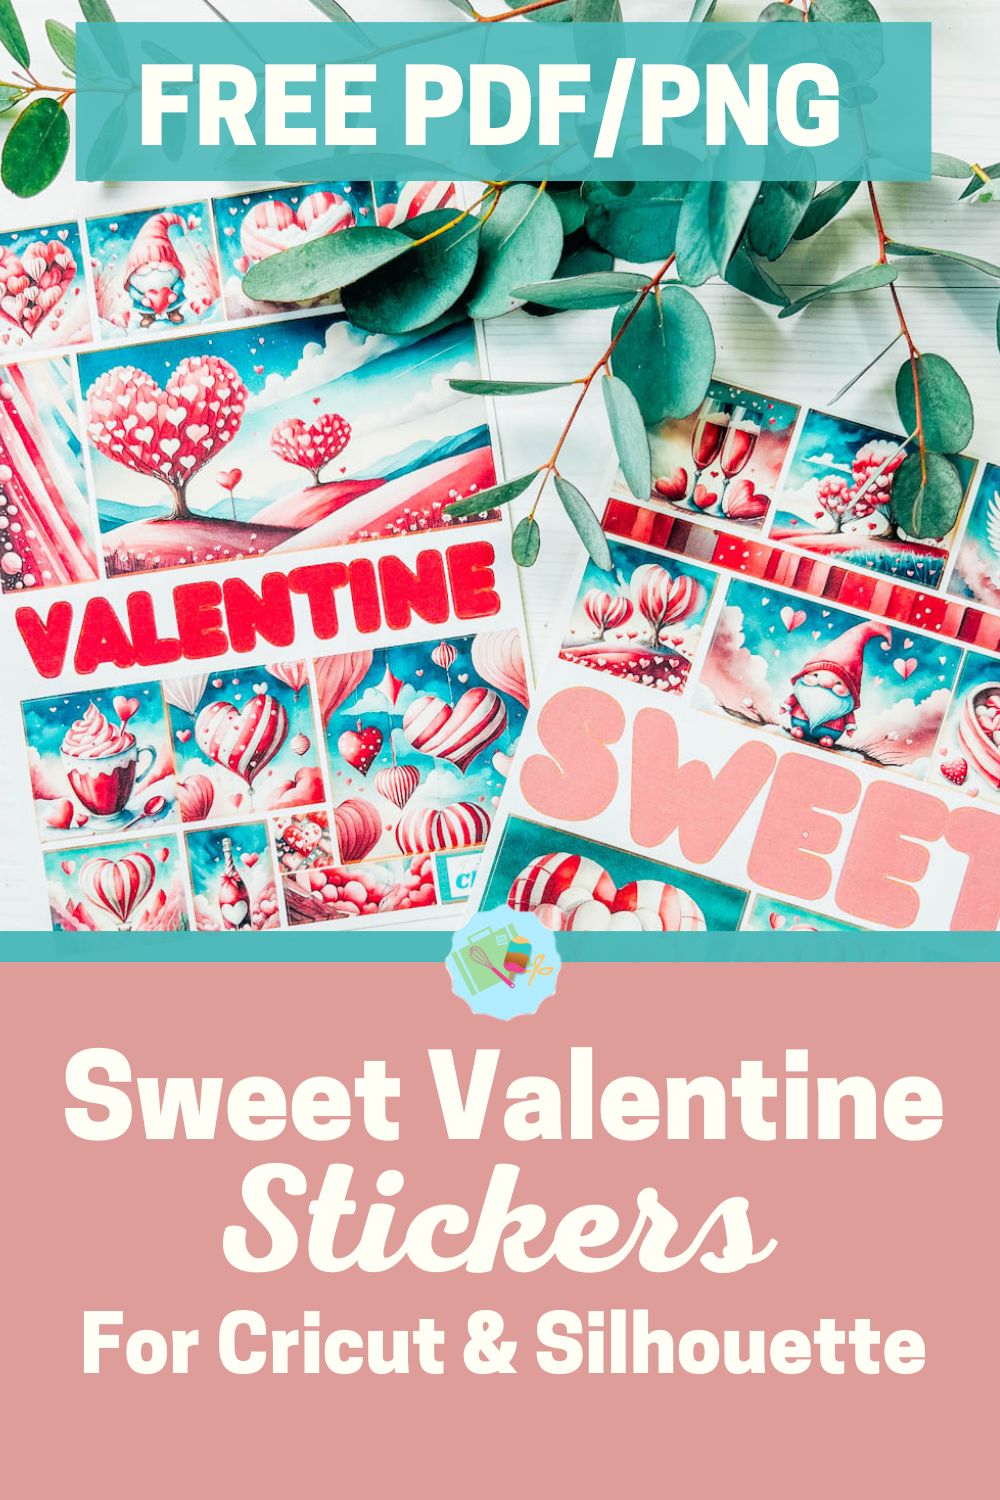 Free PDF PNG Sweet Valentine printable Stickers for Cricut and Silhouette